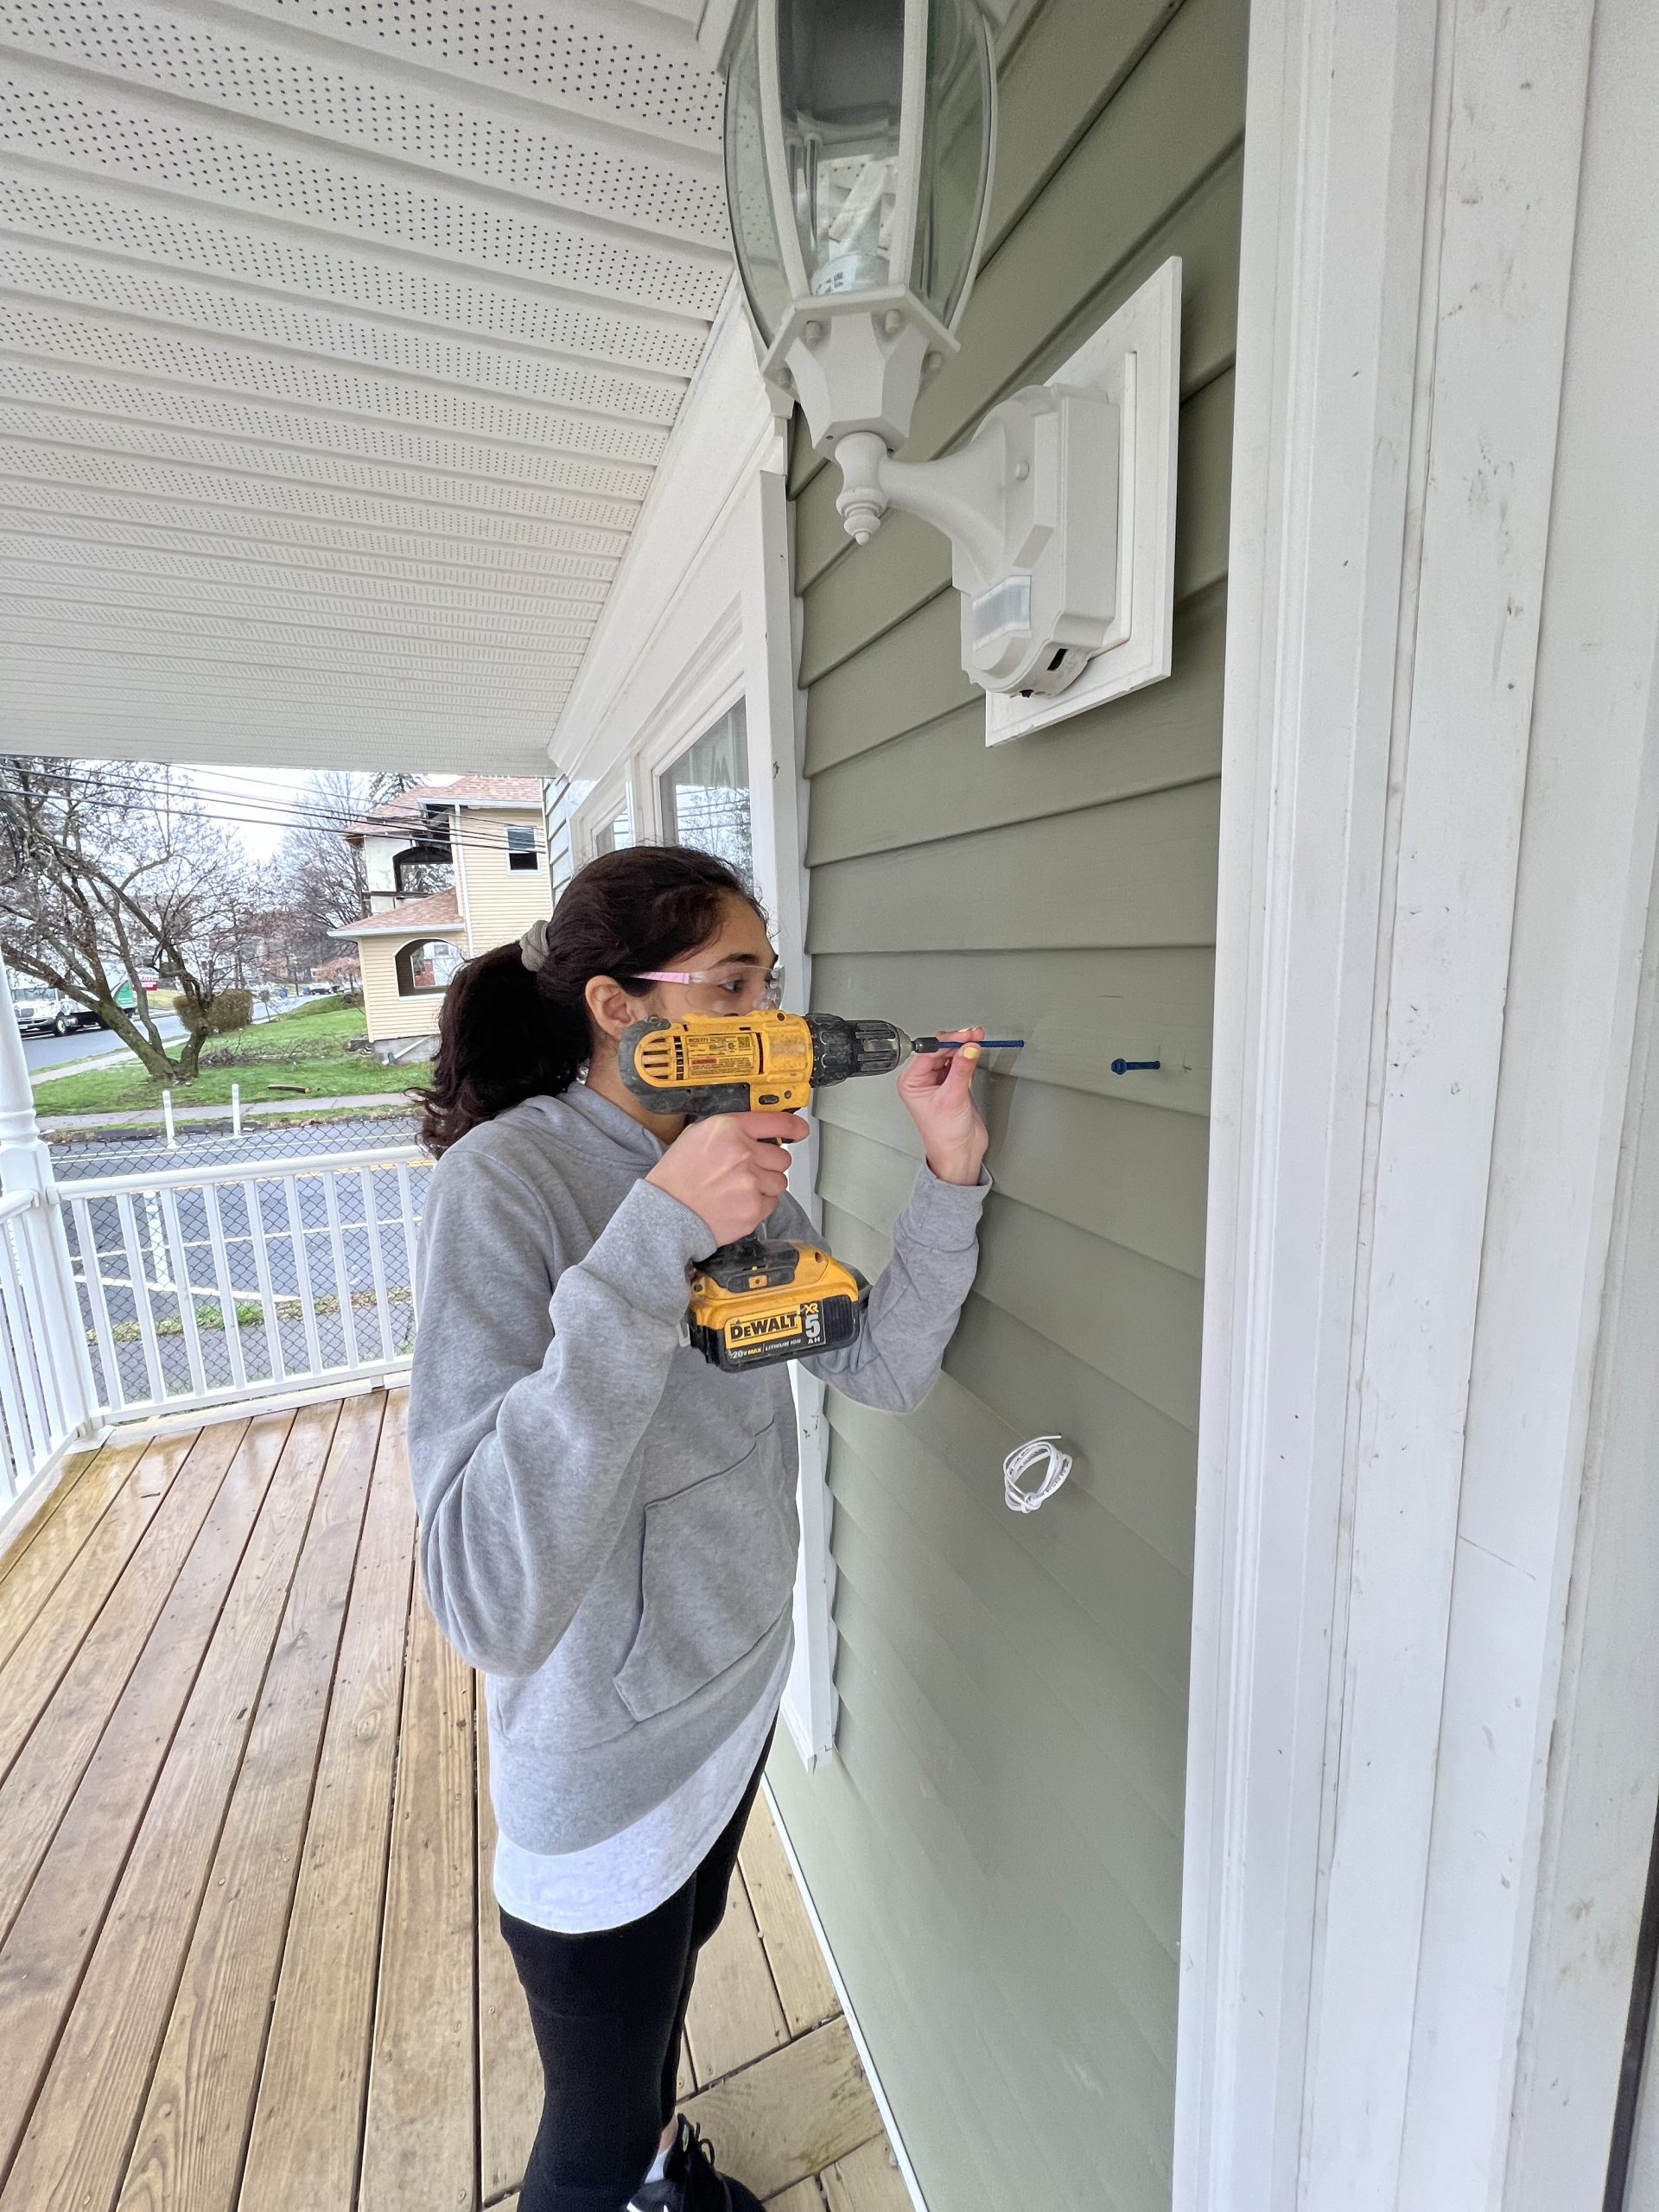 Diya Makadia, sophomore, drilling into the facade of home in order to mount a mailbox.